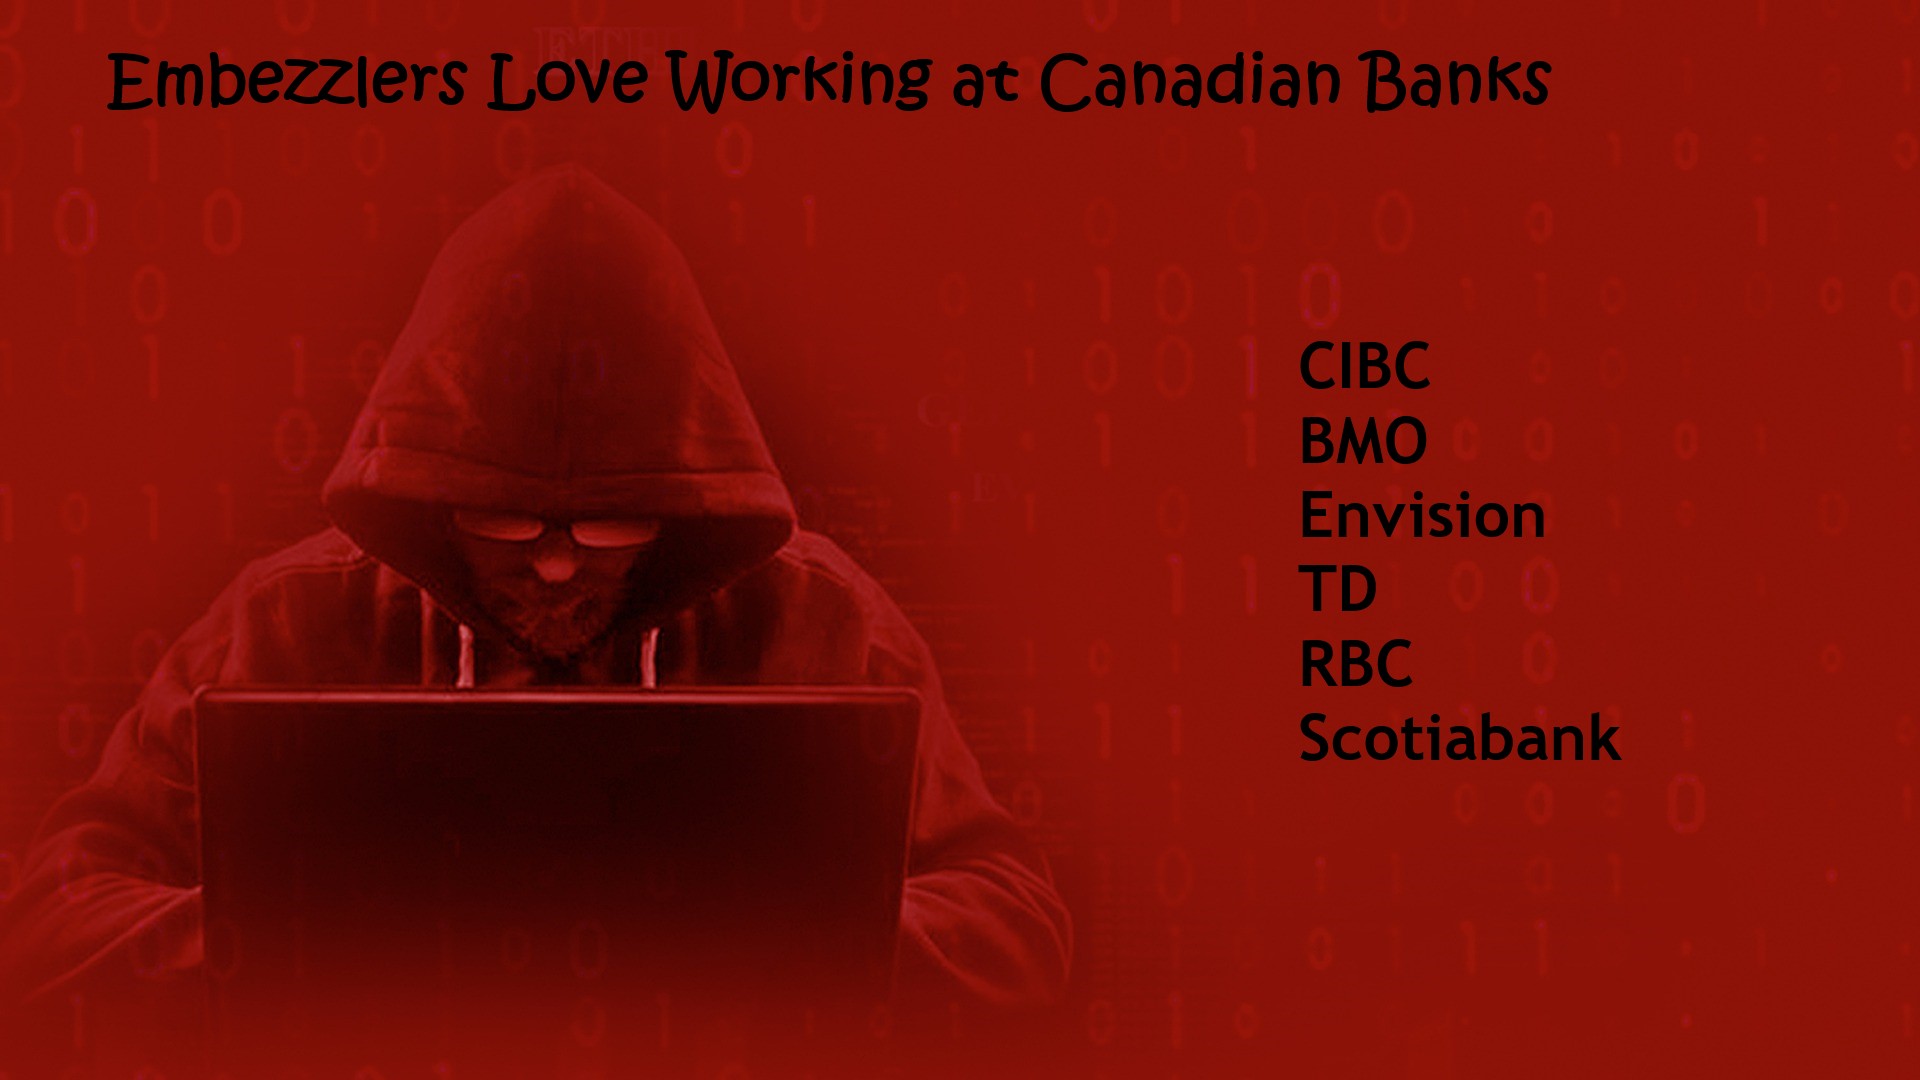 Embezzlers Love Working at Canadian Banks